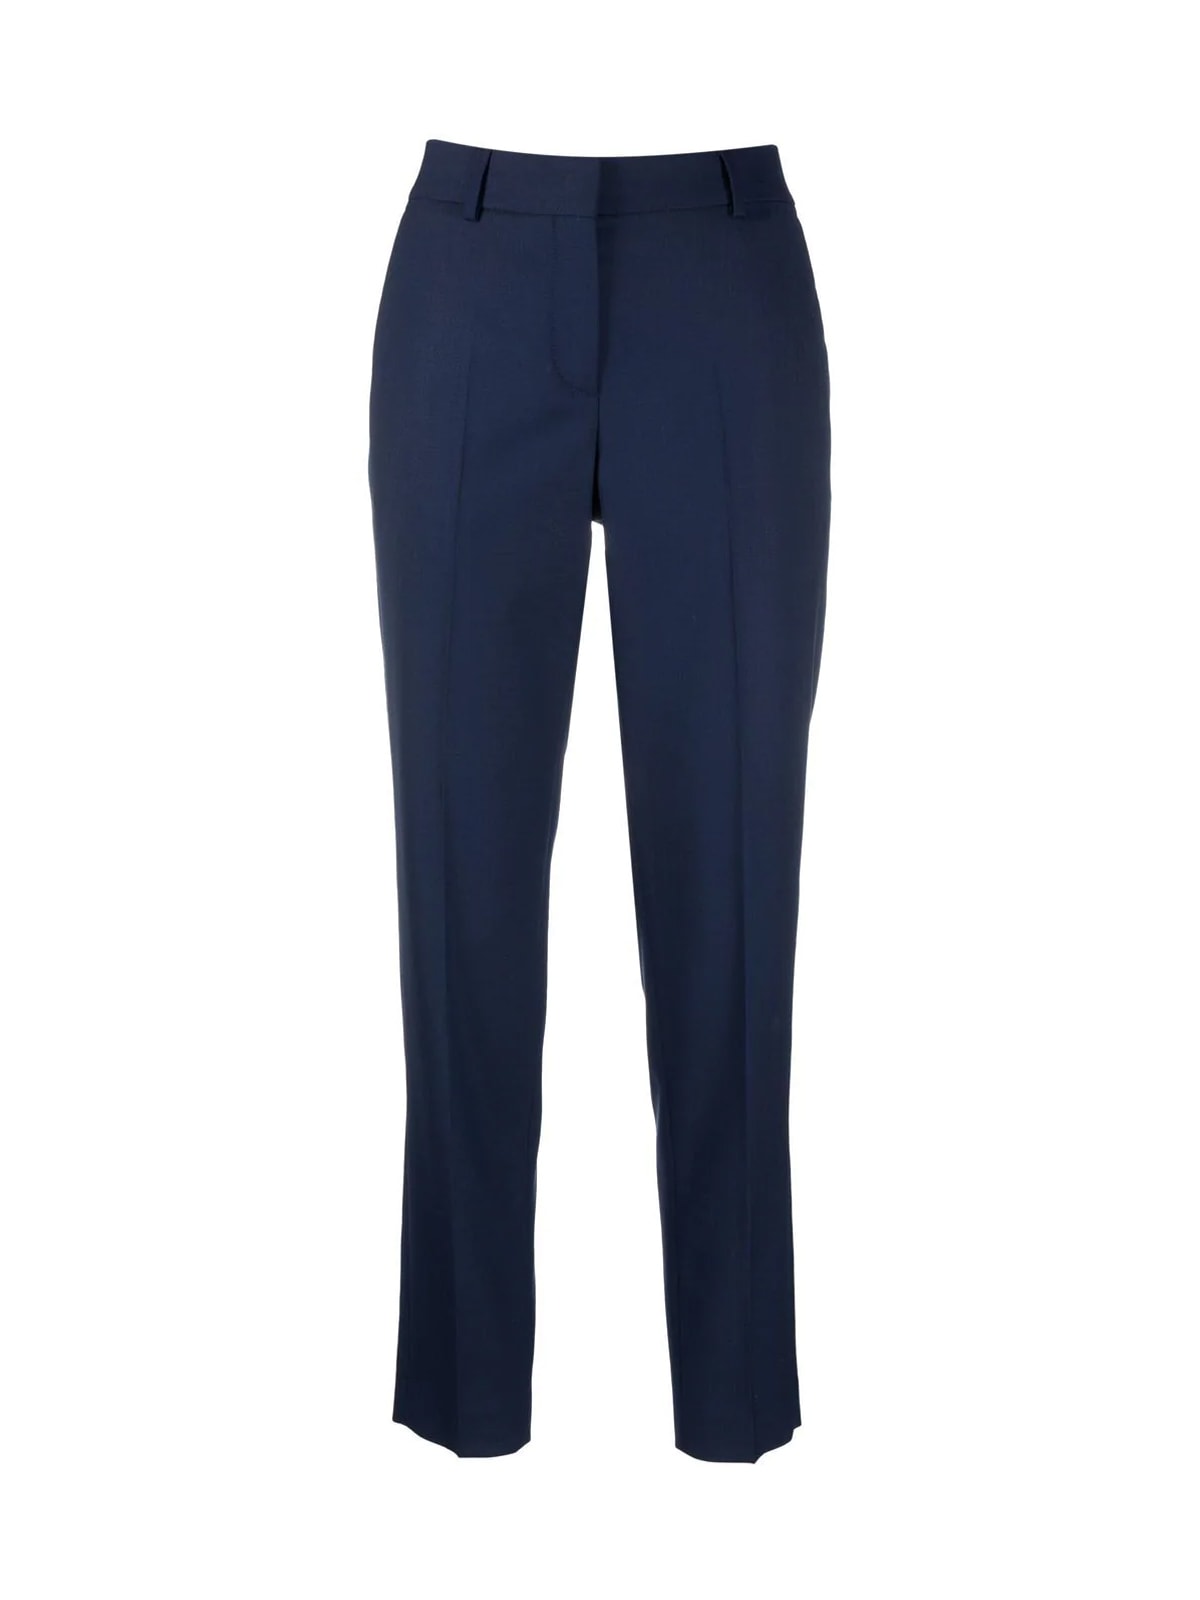 PS by Paul Smith Slim Trouser